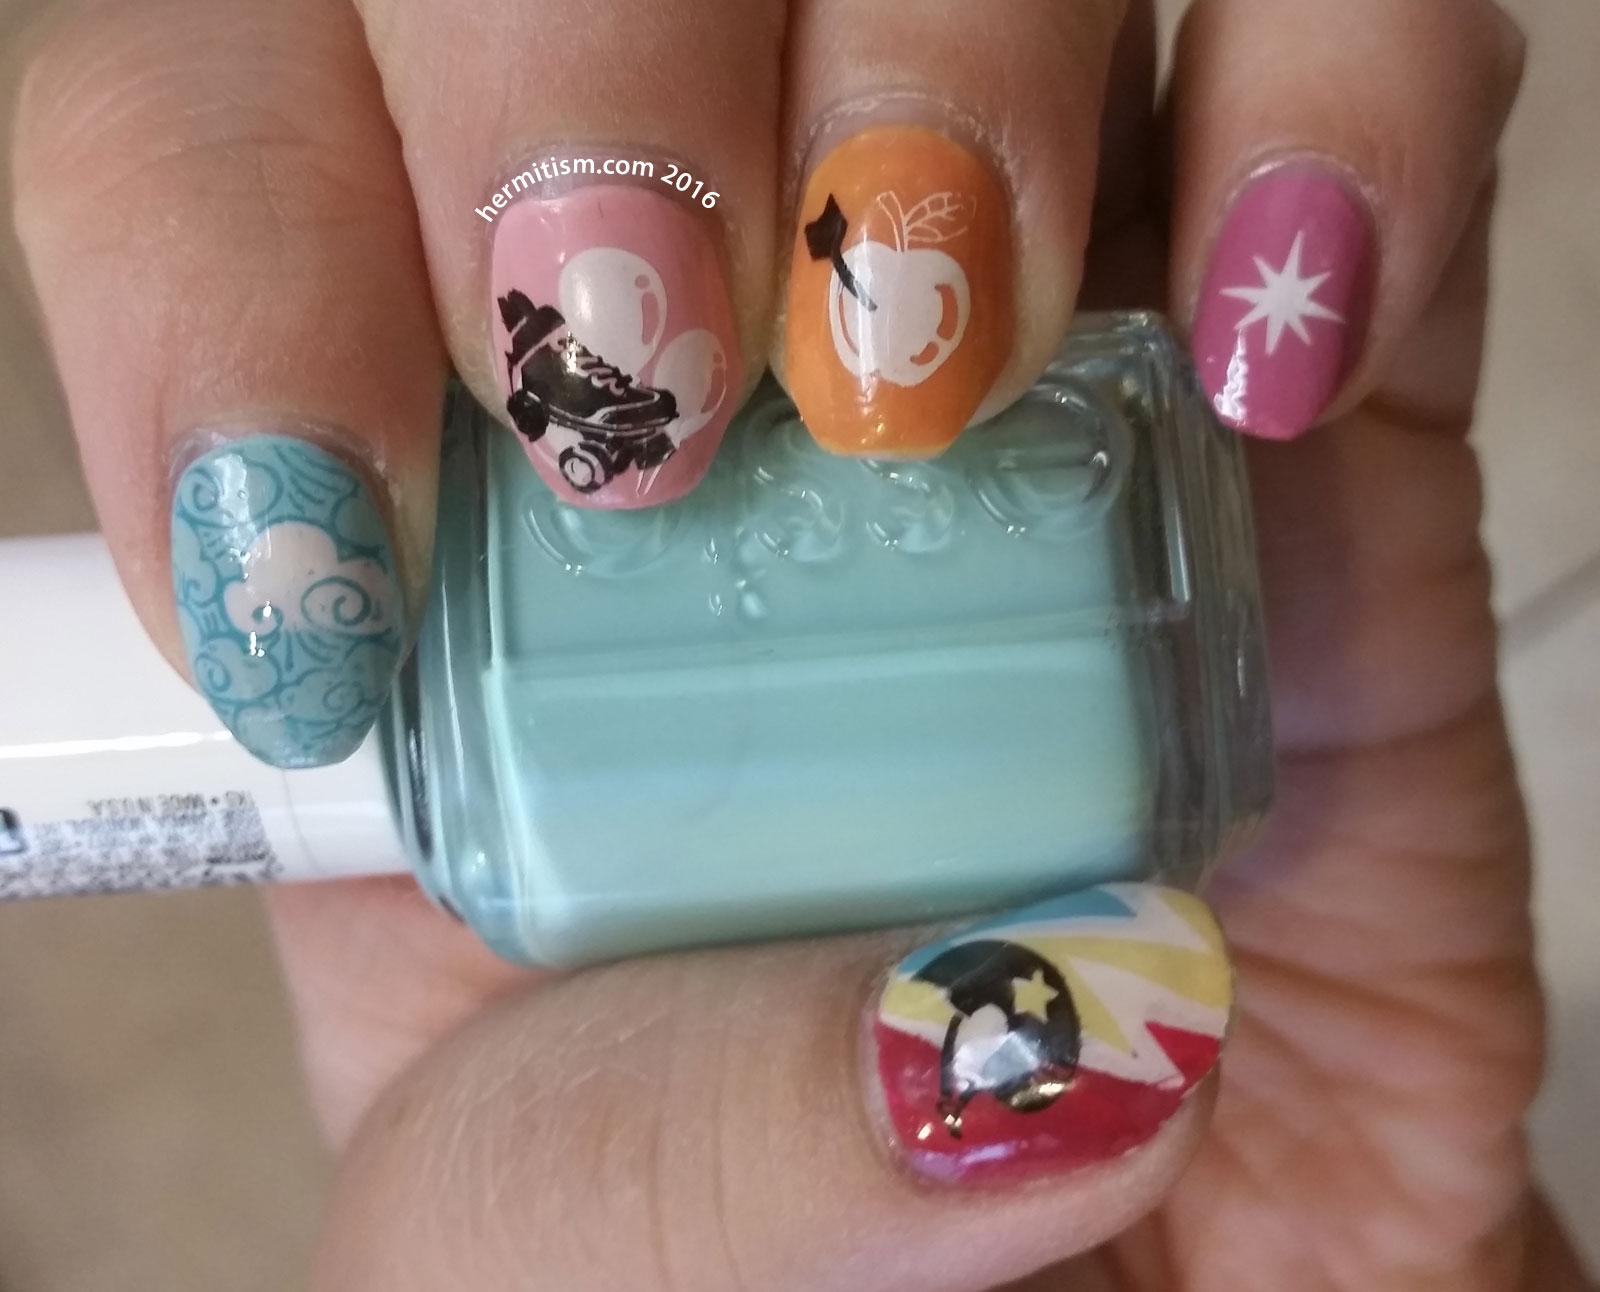 E is for Equestria Girls - ABC Nail Art Challenge - Hermit Werds